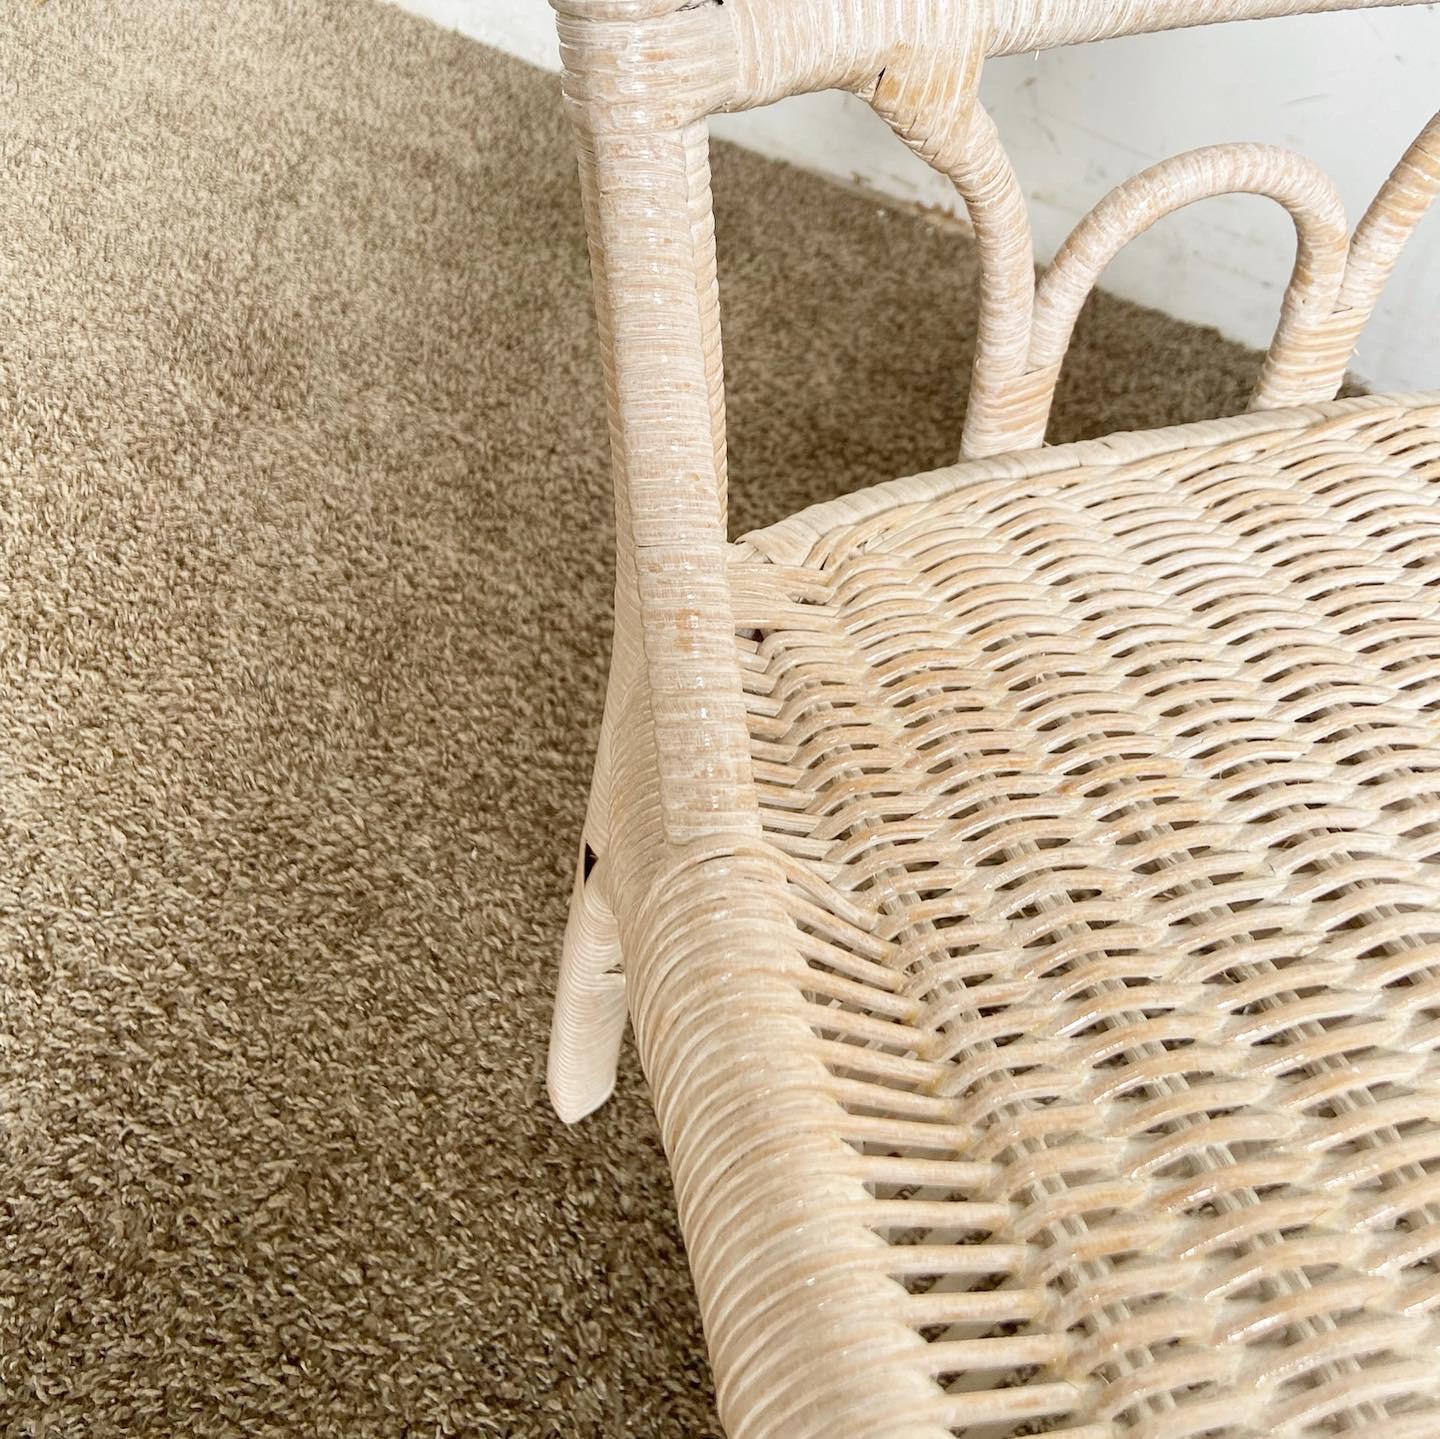 Boho Chic White Washed Wicker Rattan Side Chairs - a Pair For Sale 5